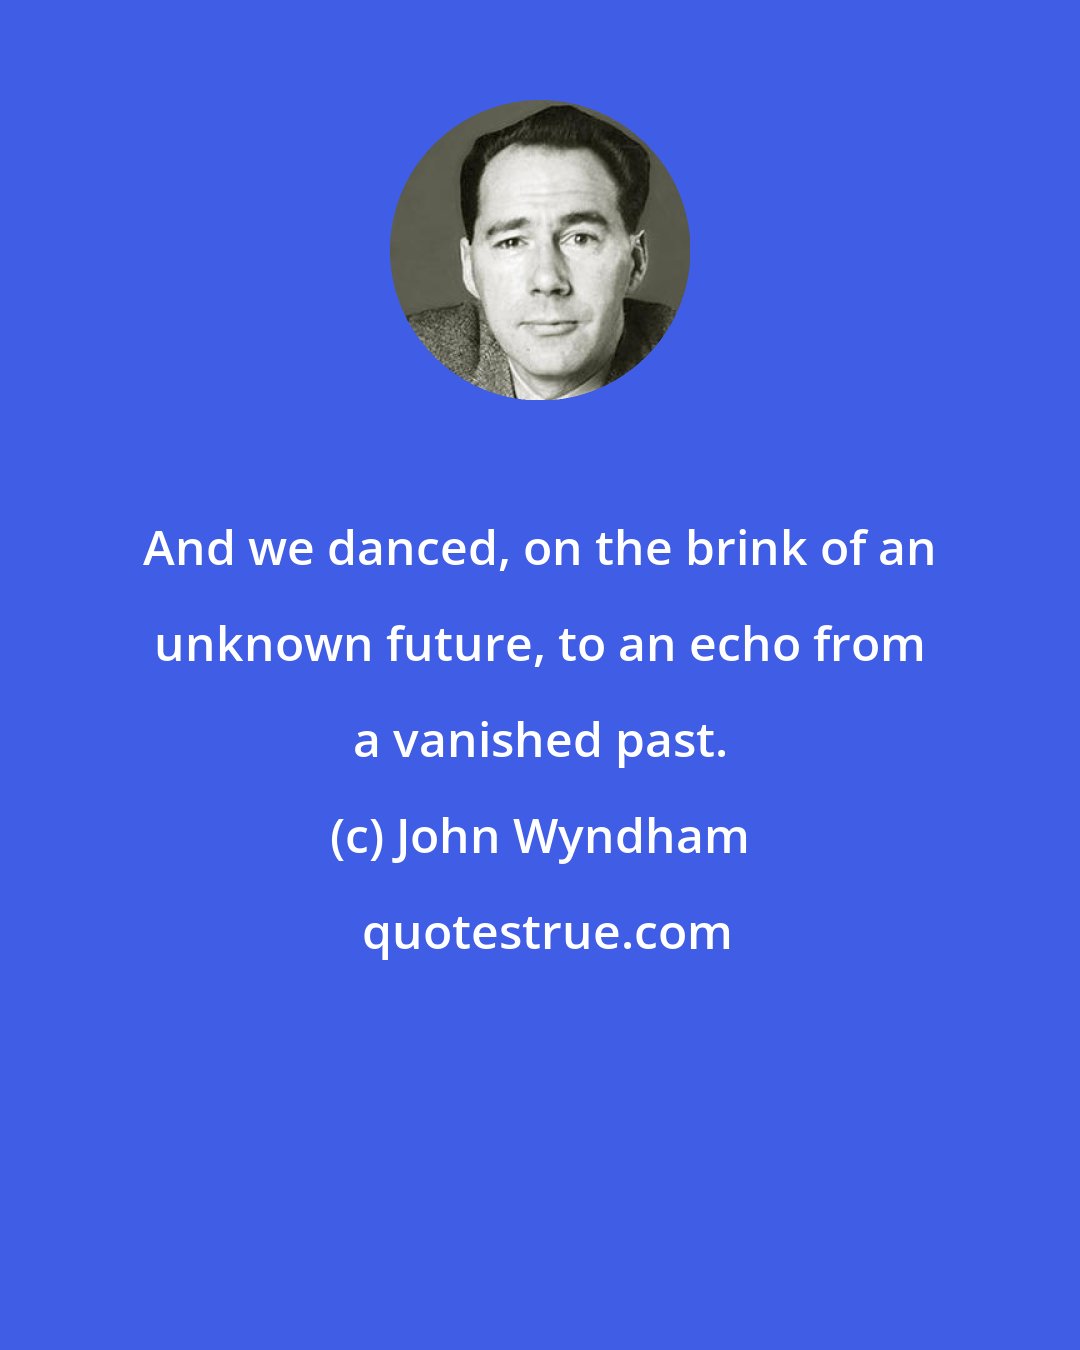 John Wyndham: And we danced, on the brink of an unknown future, to an echo from a vanished past.